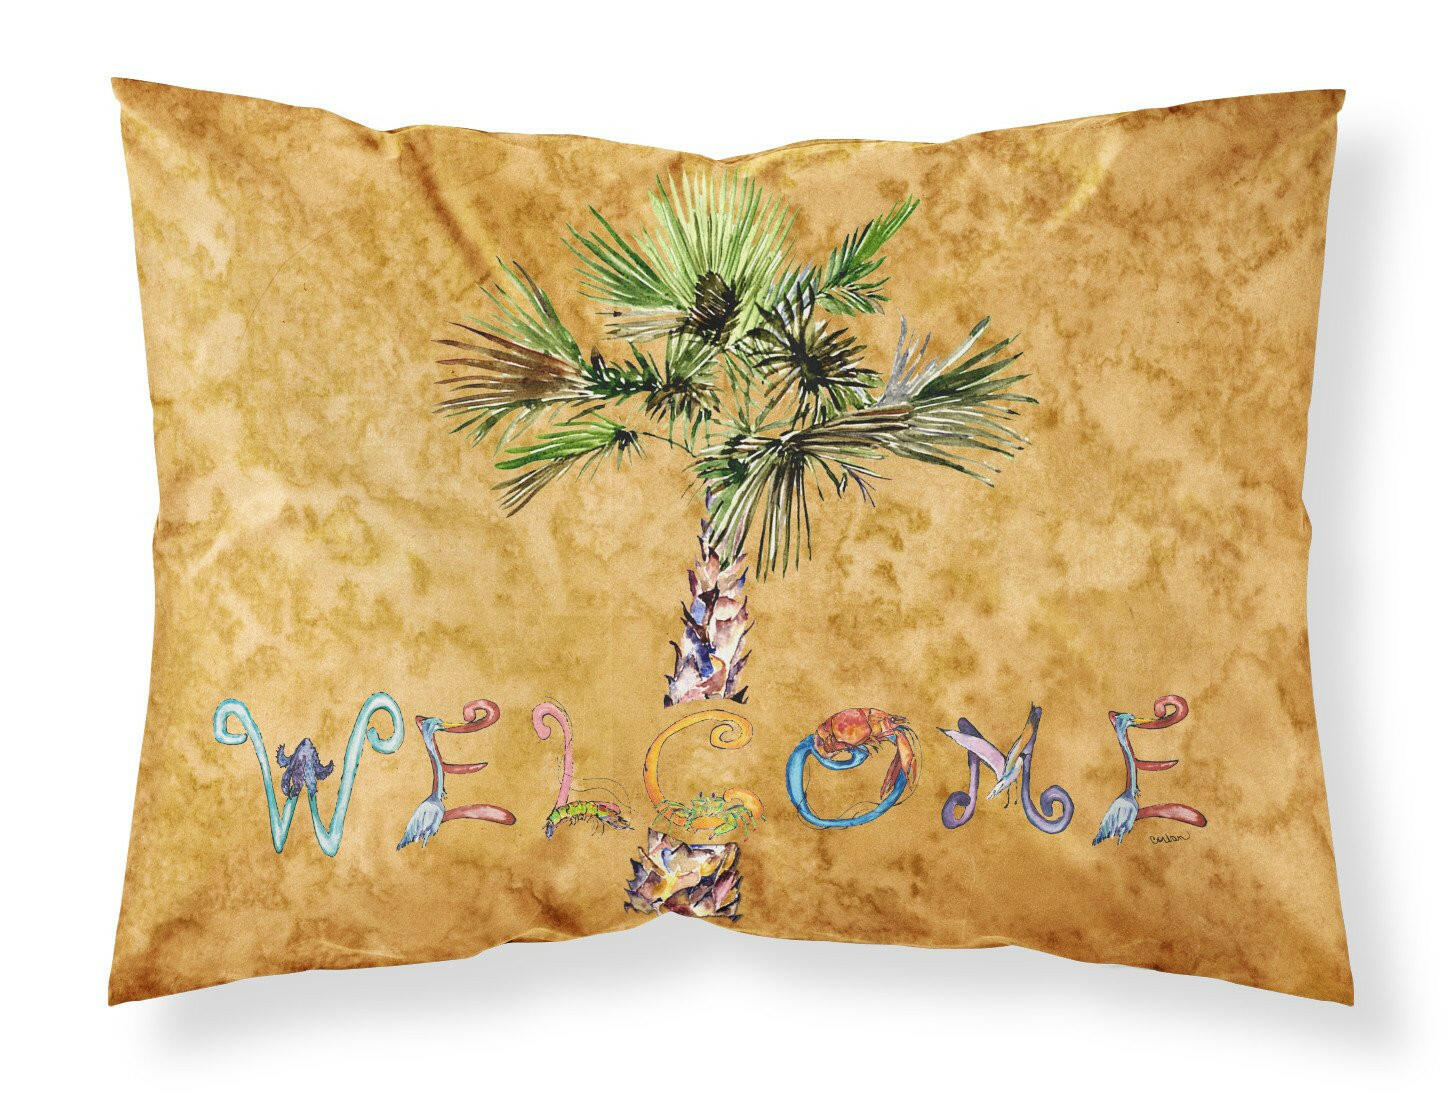 Welcome Palm Tree on Gold Fabric Standard Pillowcase 8709PILLOWCASE by Caroline's Treasures